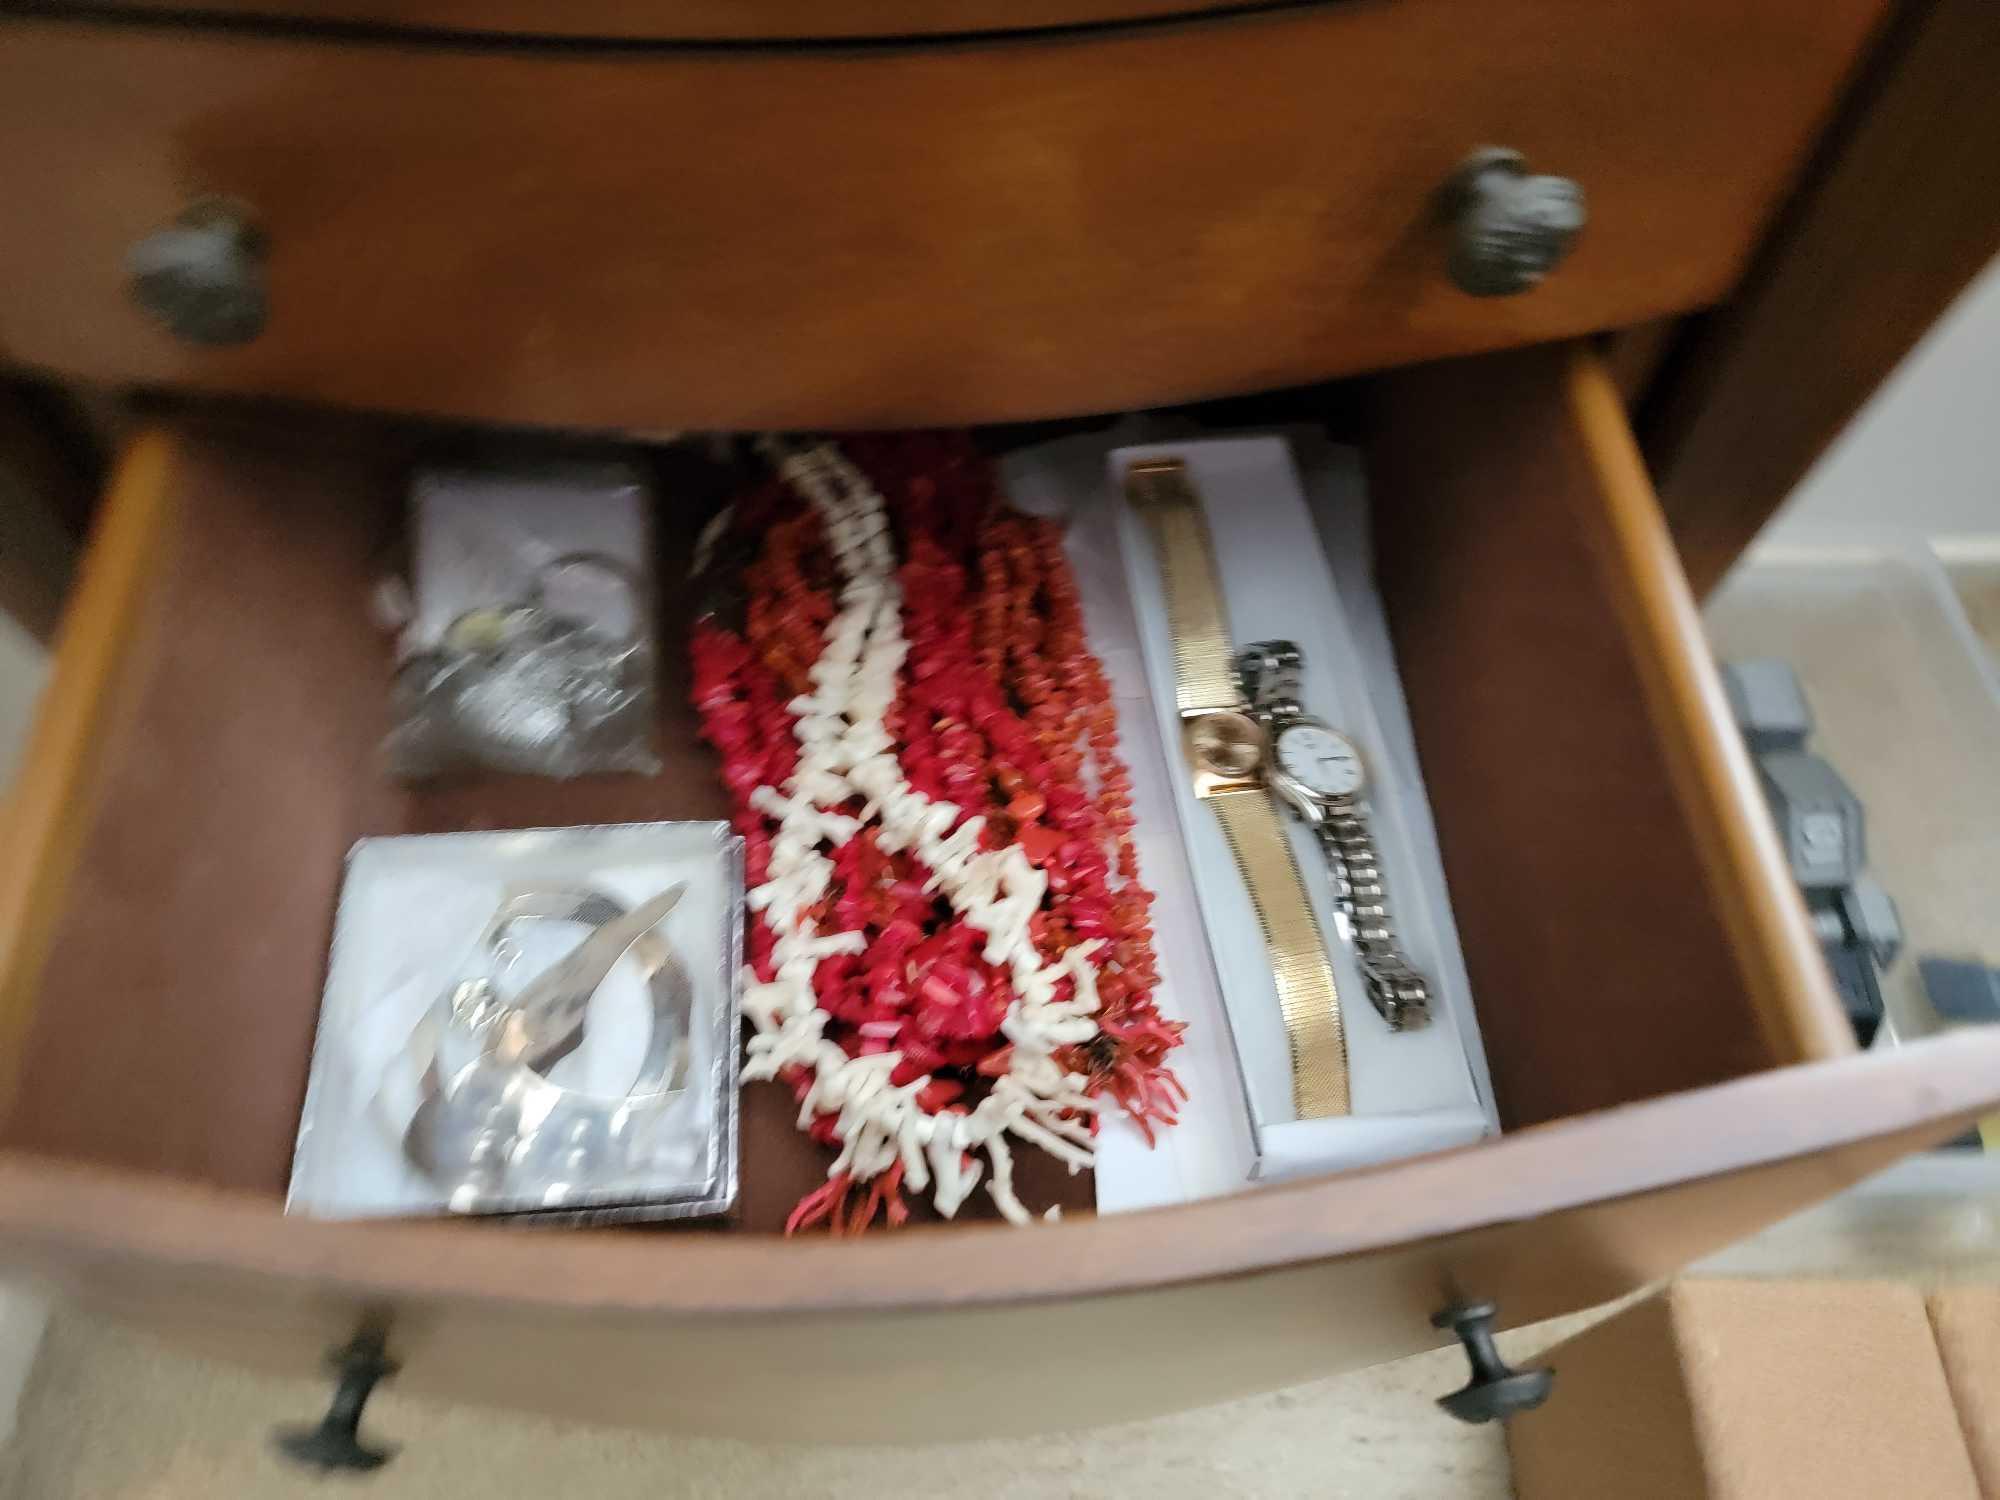 jewelry case full of jewelry, silver coins, omega watch nice